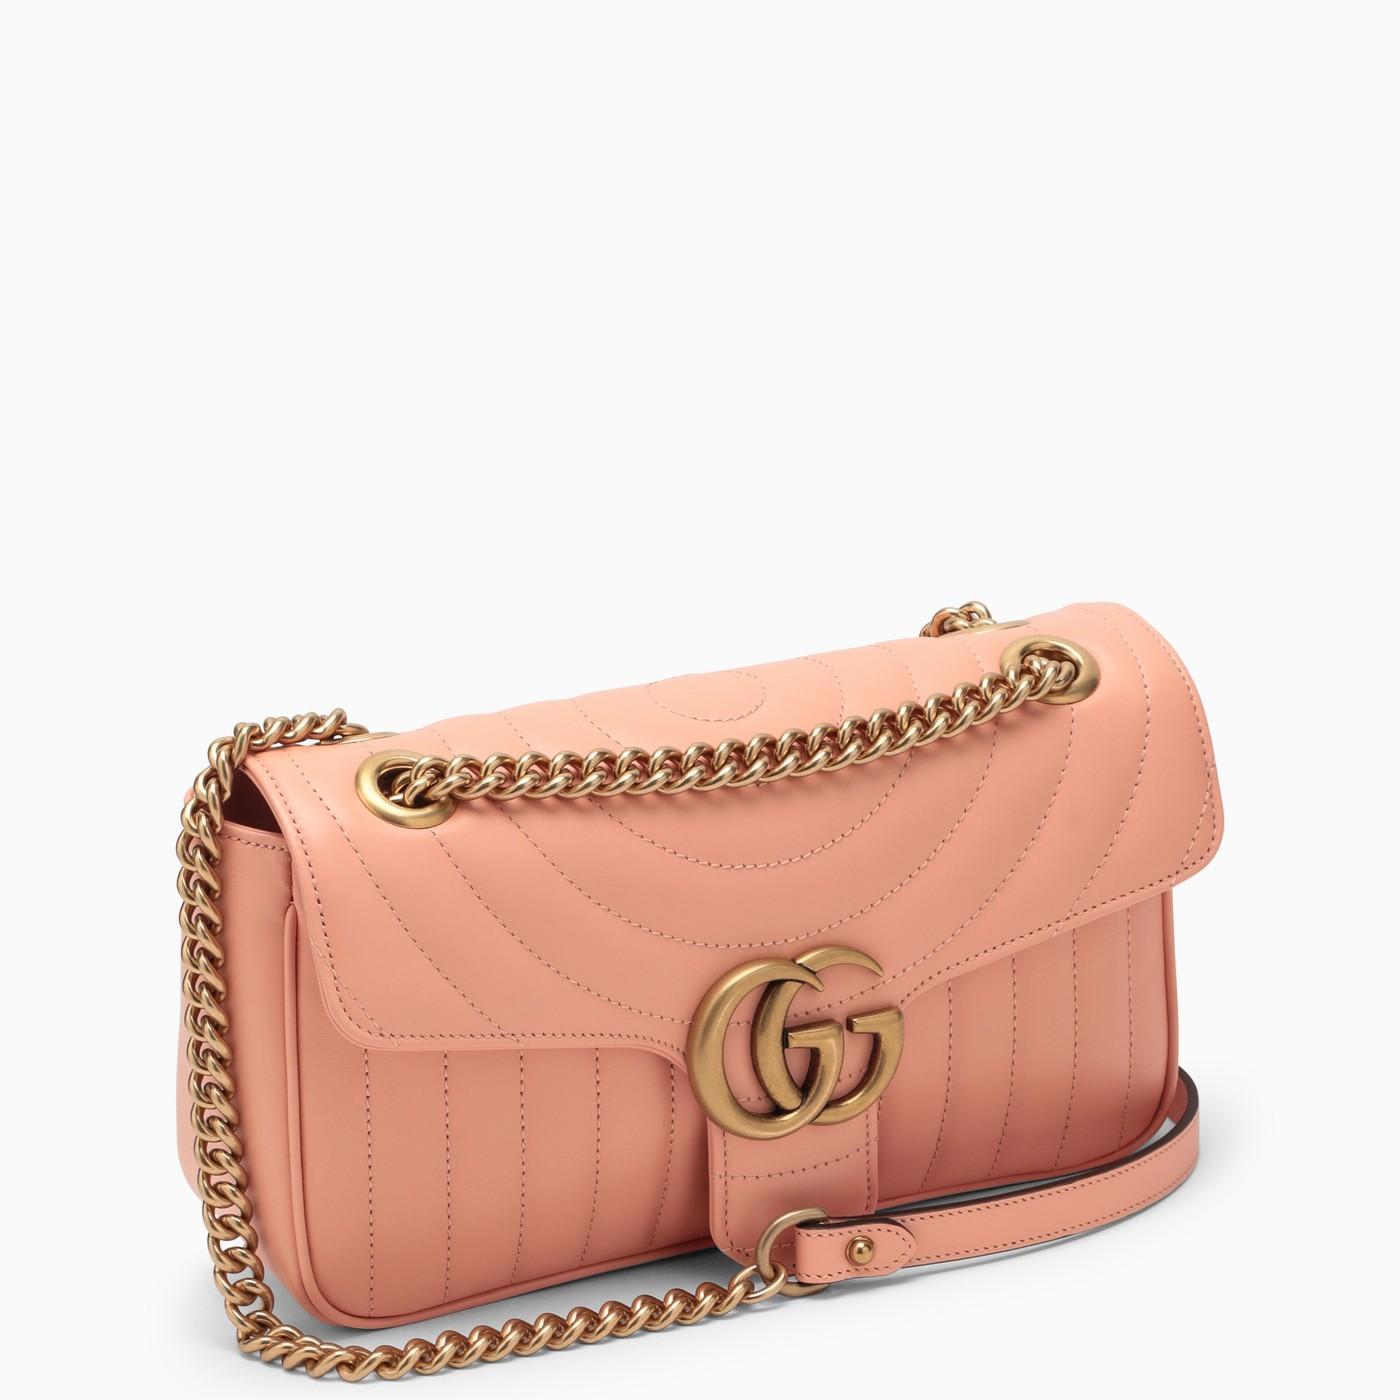 Gucci Peachy Gg Marmont Small Shoulder Bag in Pink